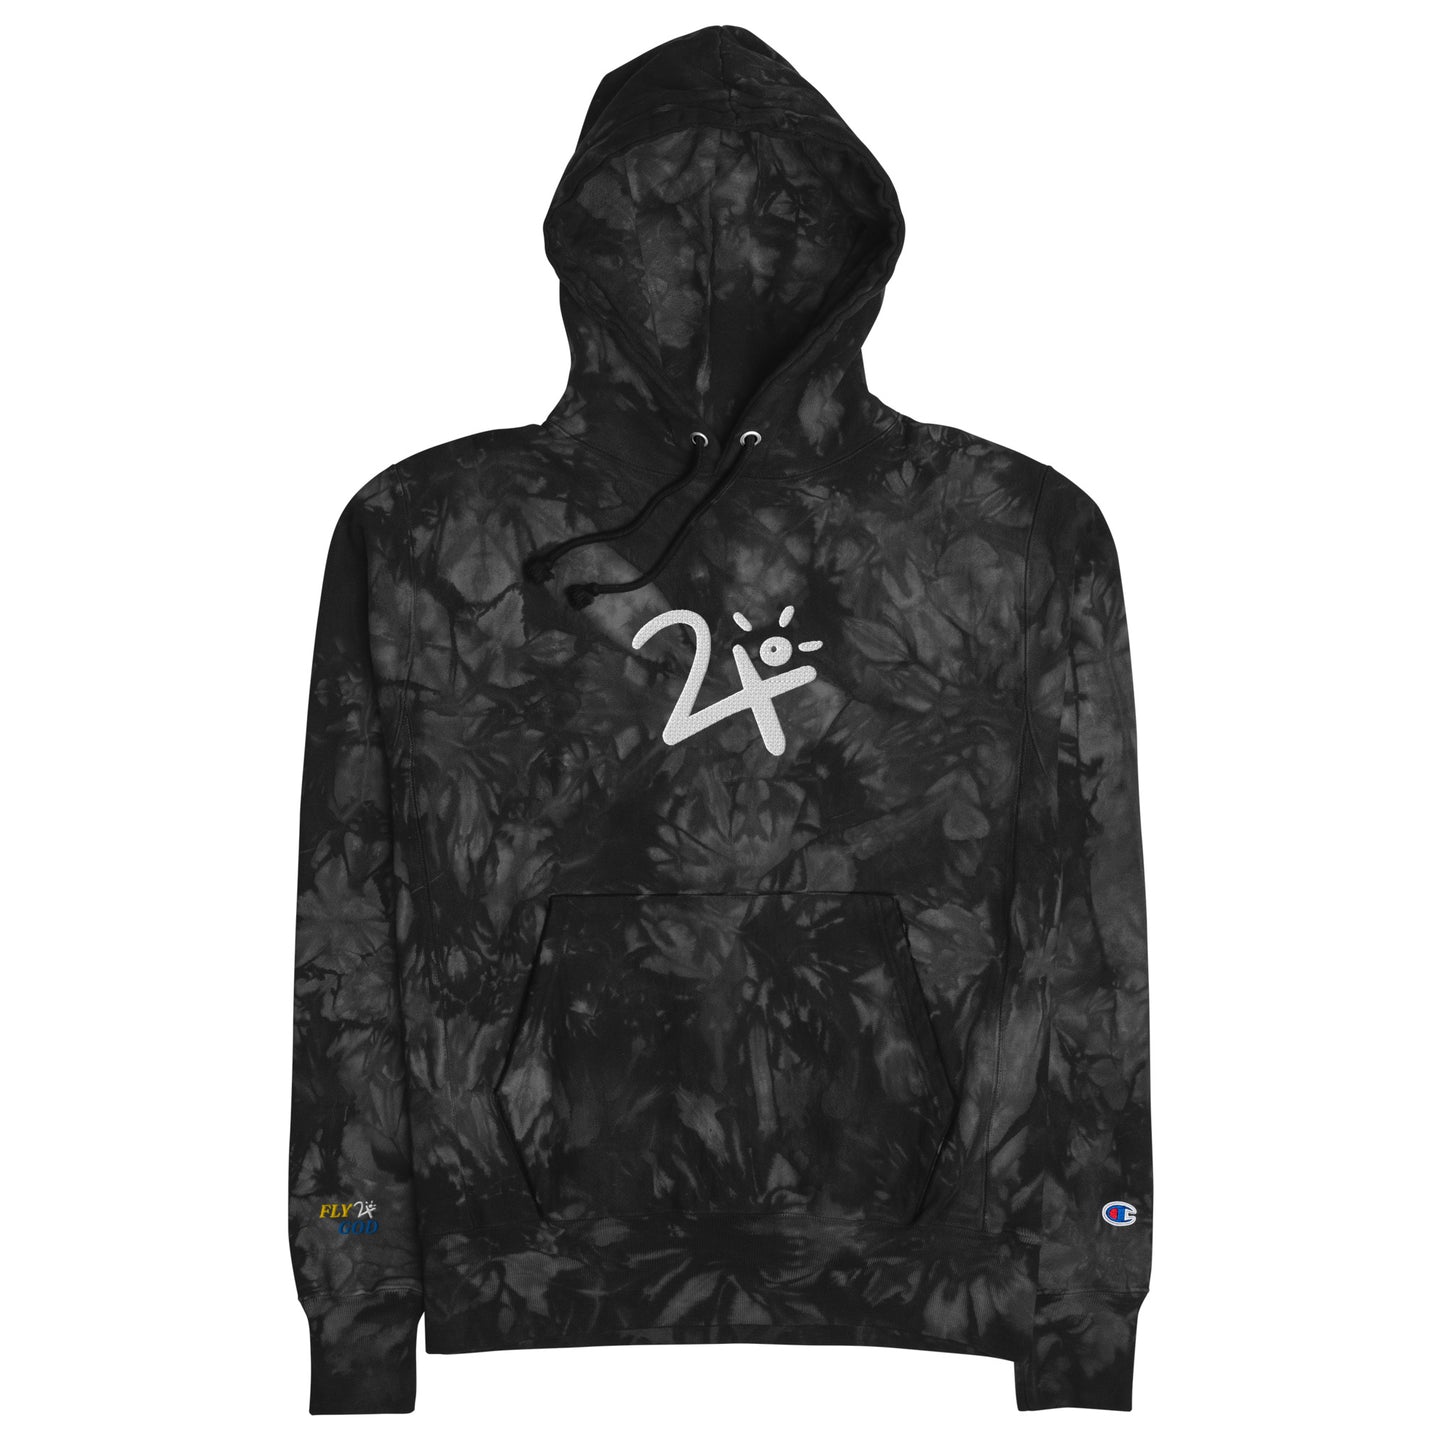 2x10 Fly God Embroidered Champion tie-dye Hoodie